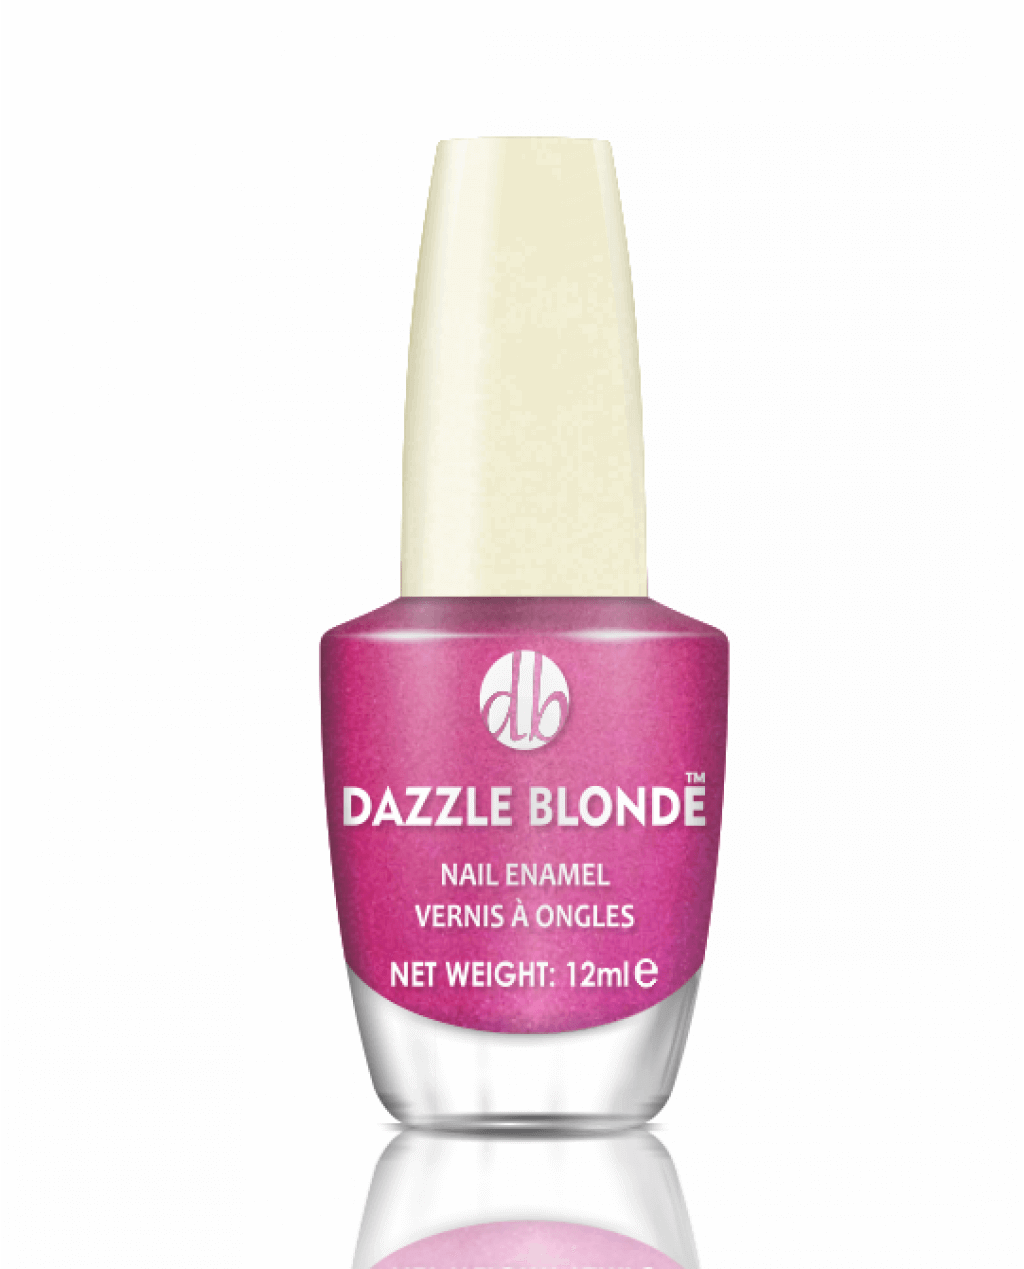 PINK PLAY Nail Polish by Dazzle Blonde